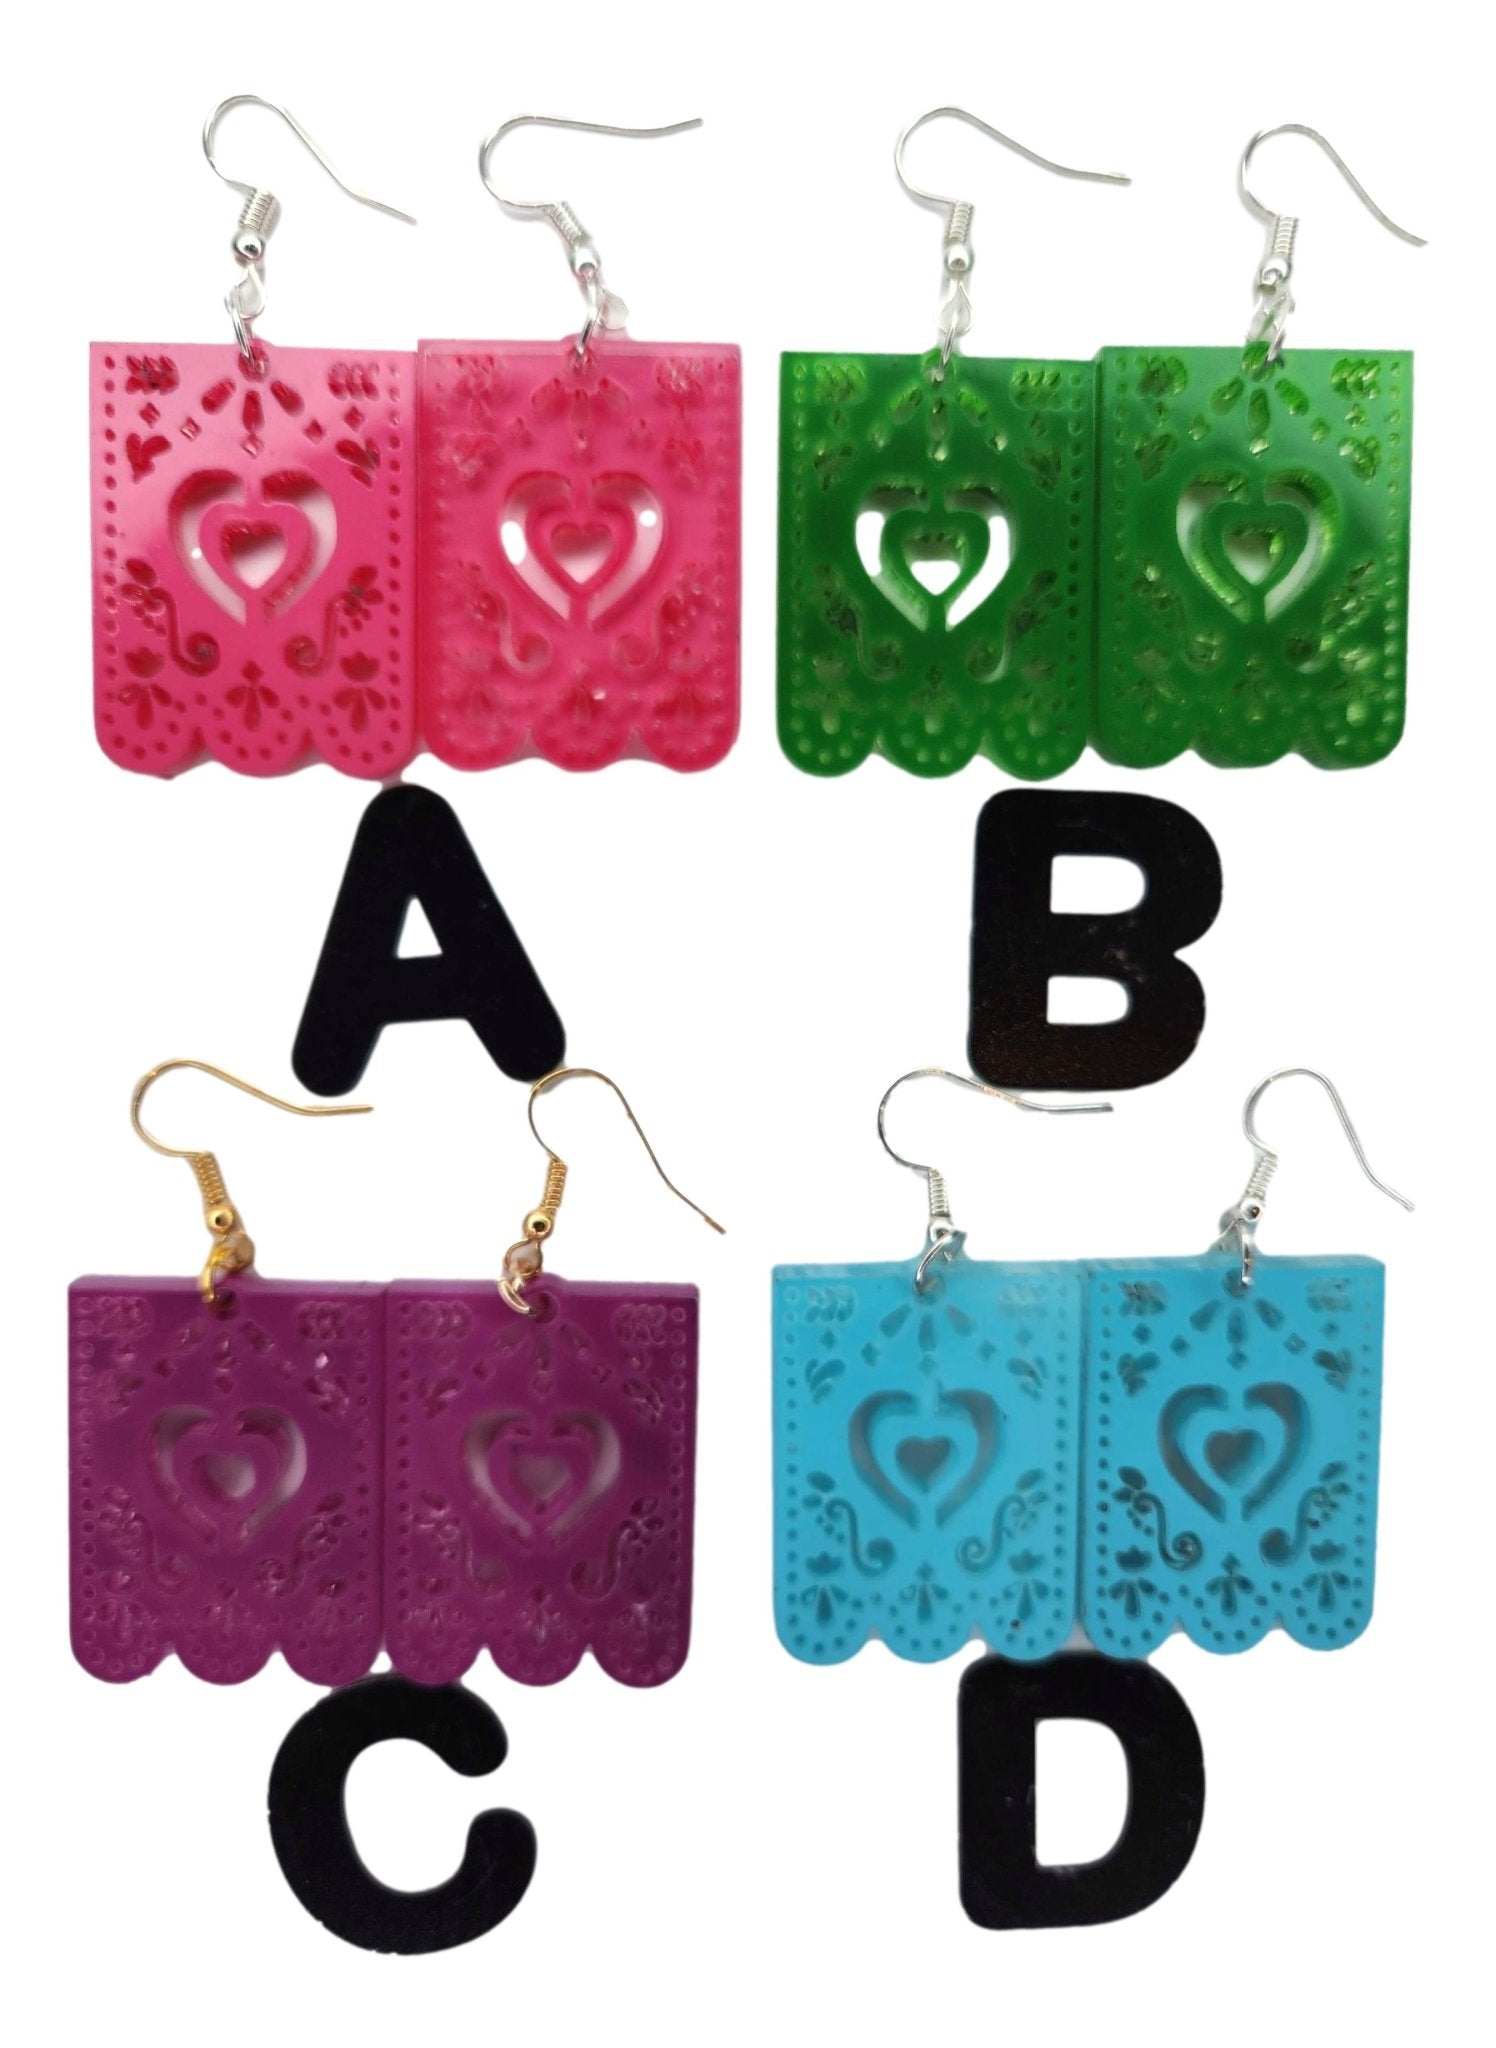 Earrings Day of The Dead Papel Picado Hearts Acrylic Handcrafted By El Paso Artist Norma L: 1.5 inches X W:1.5 inches - Ysleta Mission Gift Shop- VOTED 2022 El Paso's Best Gift Shop